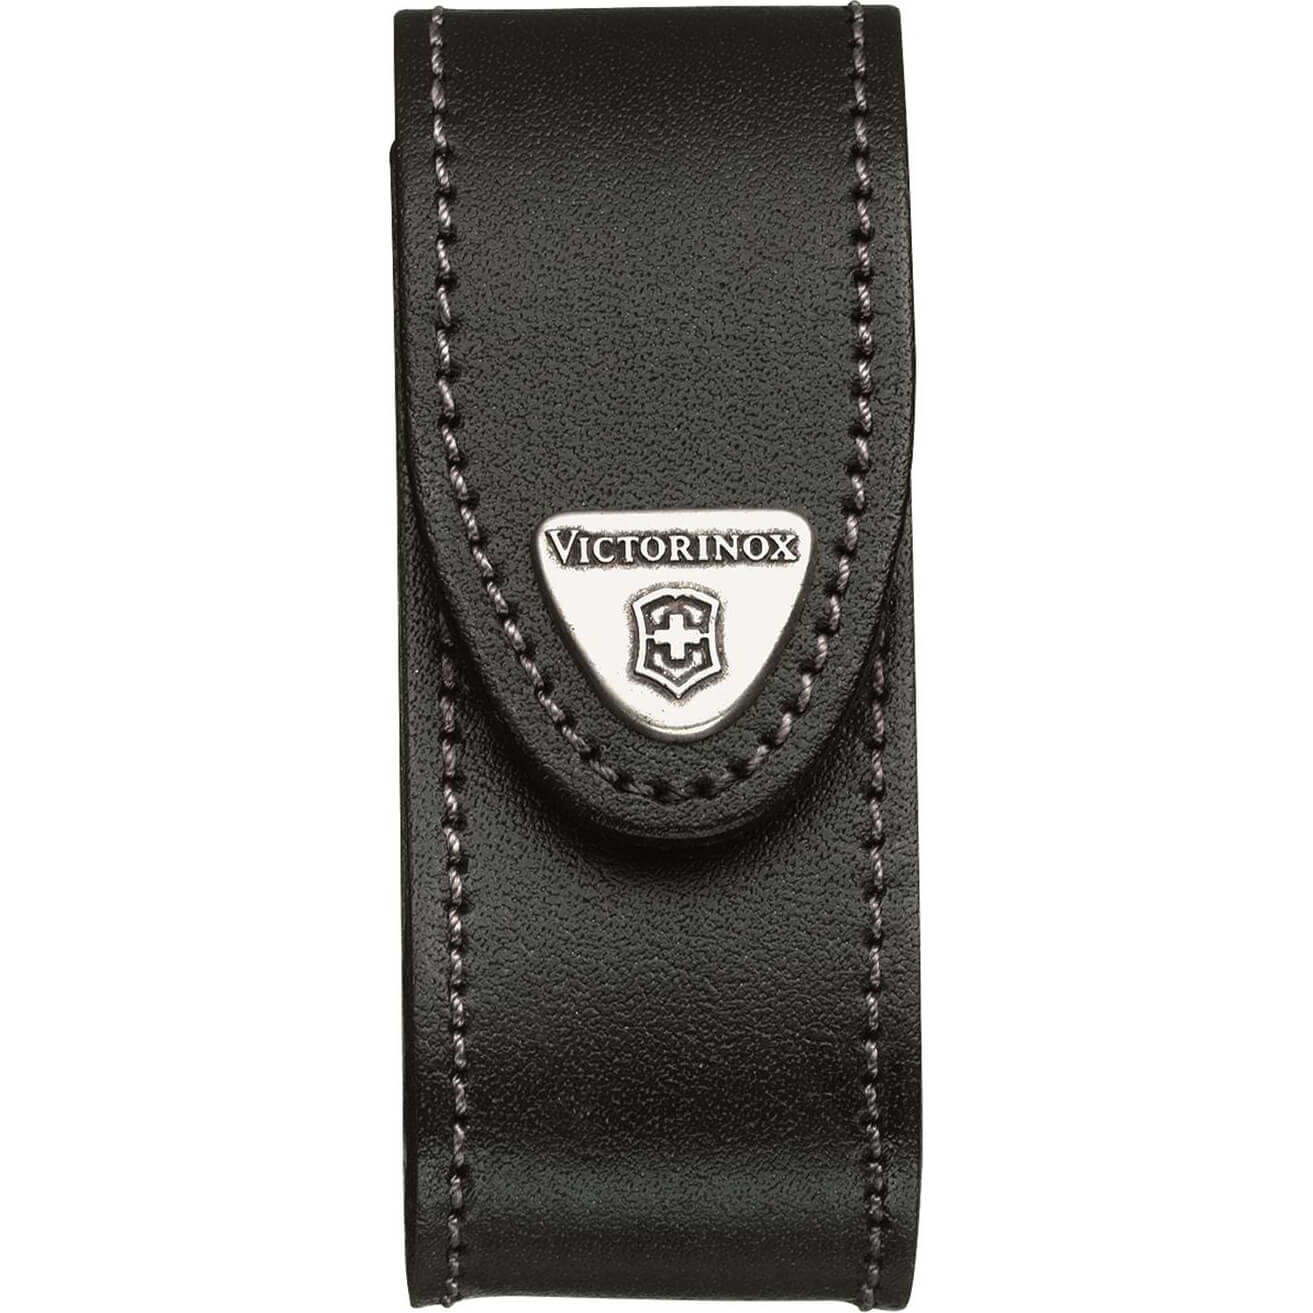 Image of Victorinox Black Leather Pouch Fits 2-4 Layer Swiss Army Knives